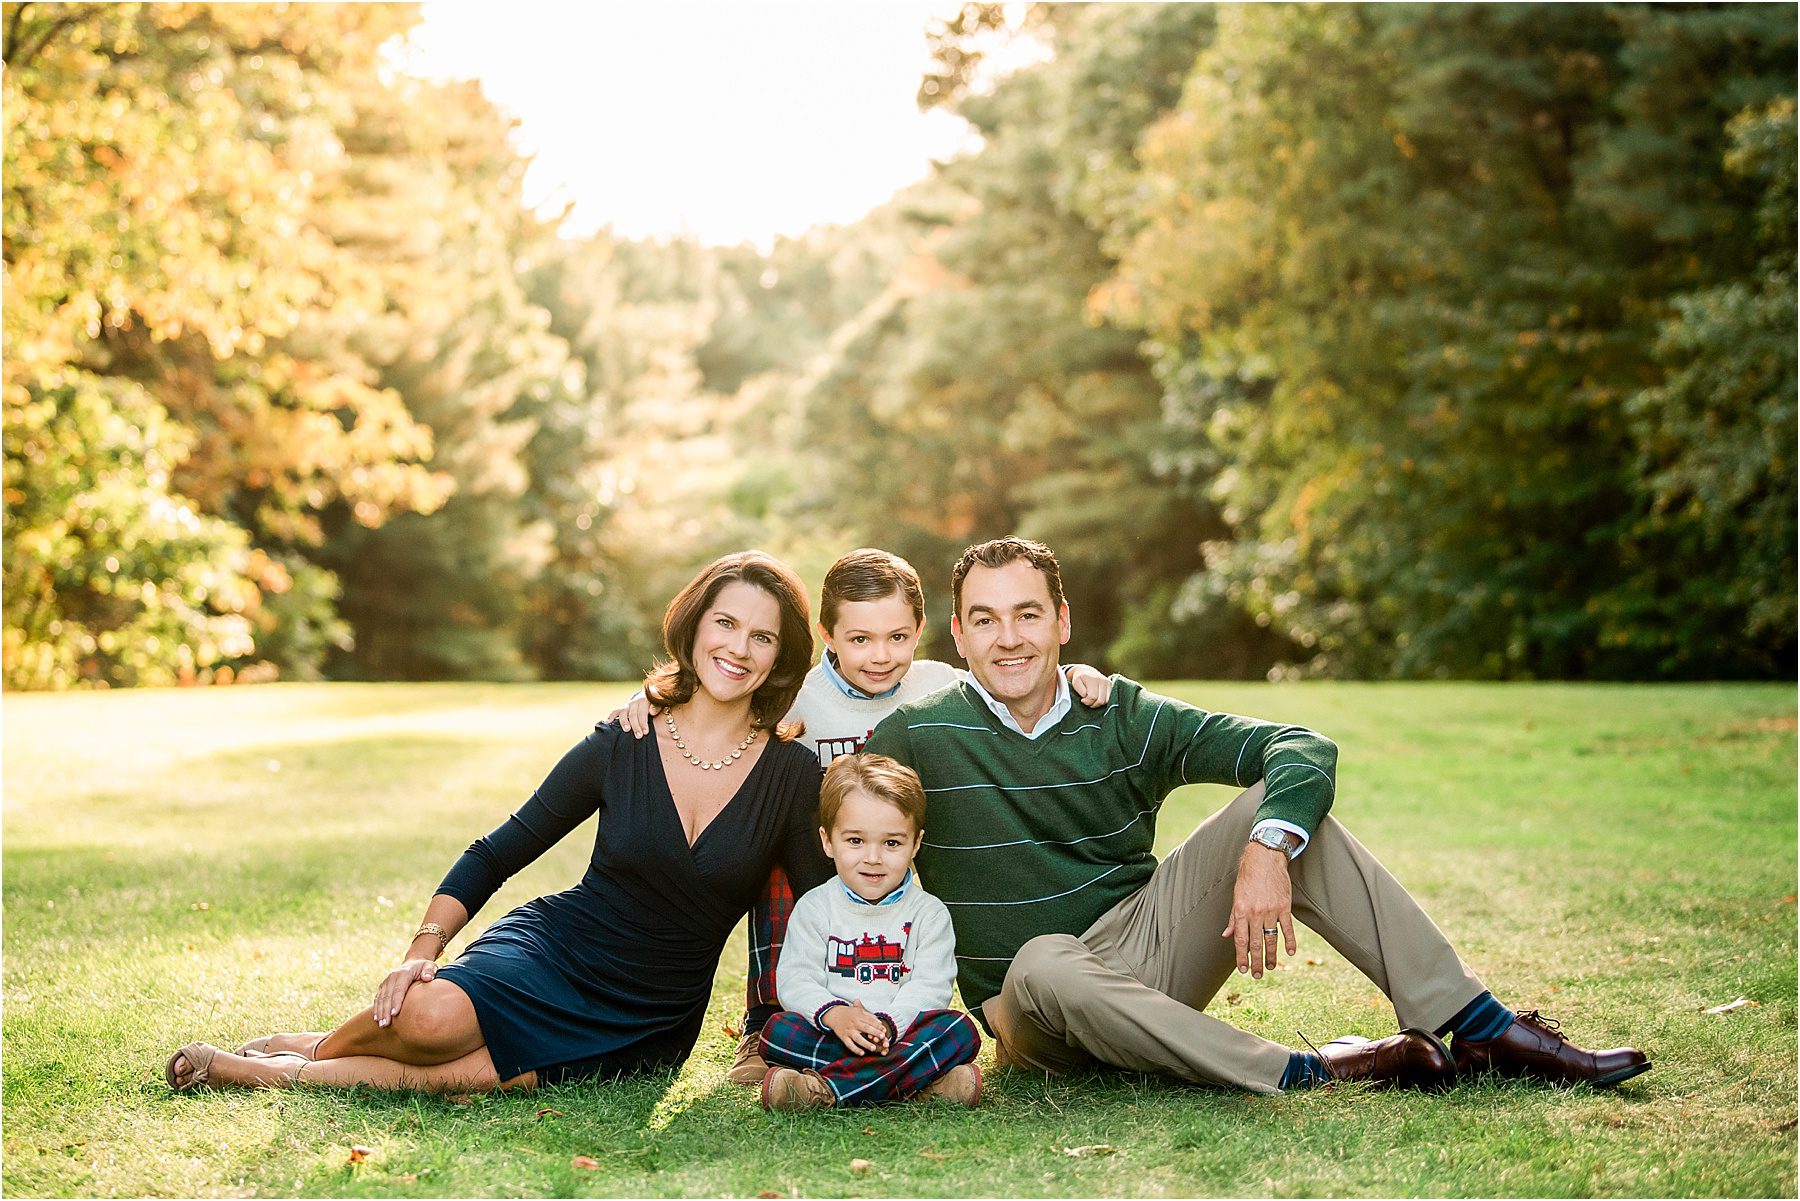 What to Wear at Your Family Portrait Session